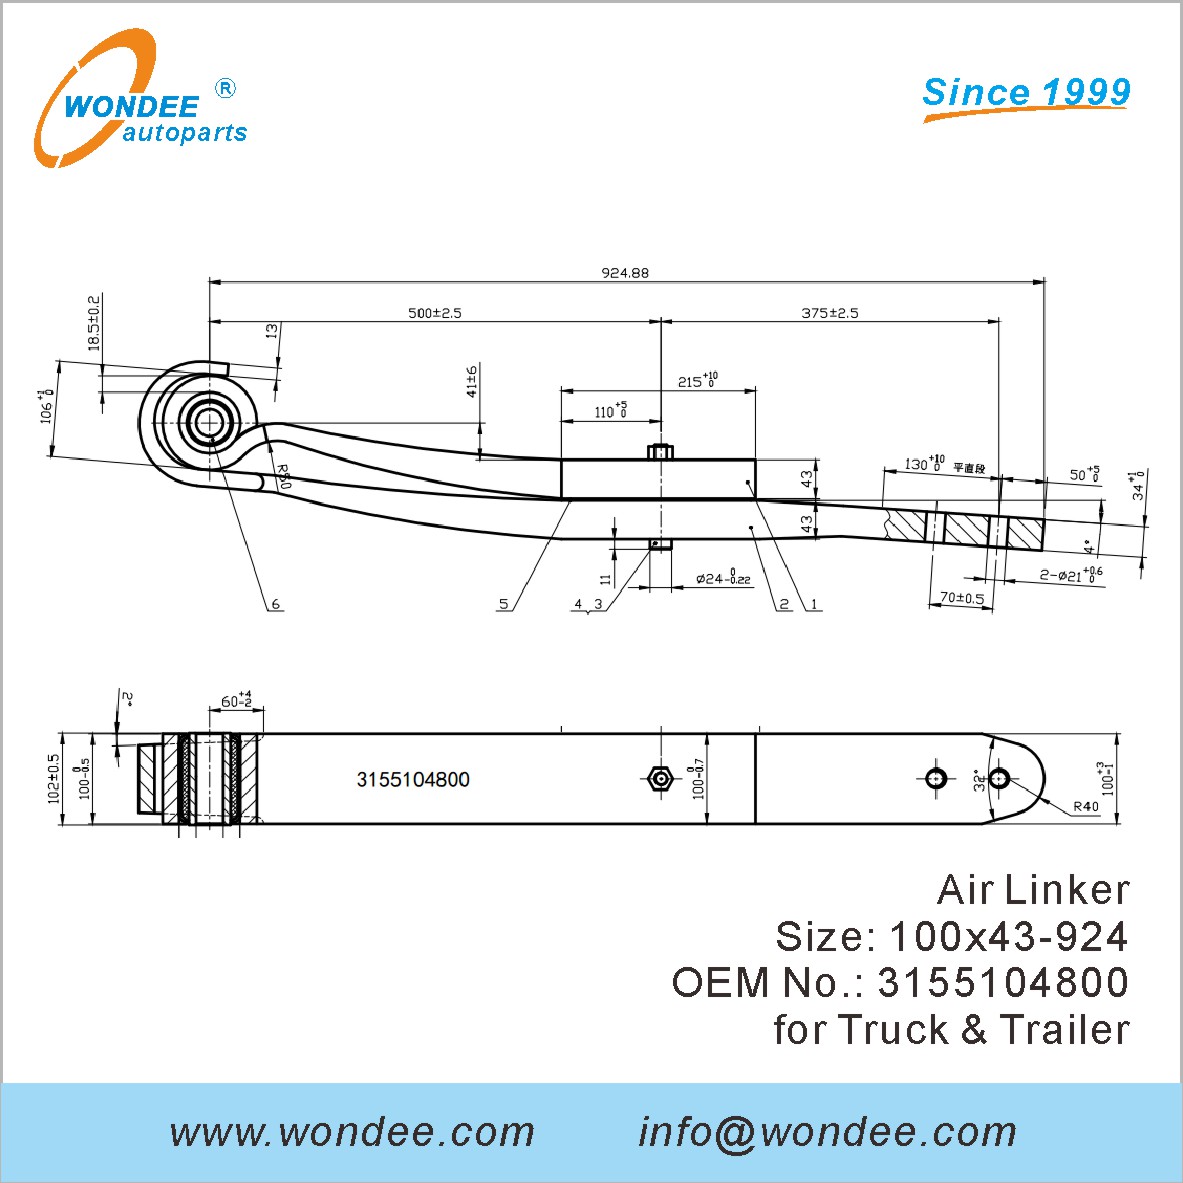 WONDEE Autoparts Air Linker OEM 3155104800 for Truck & Trailer